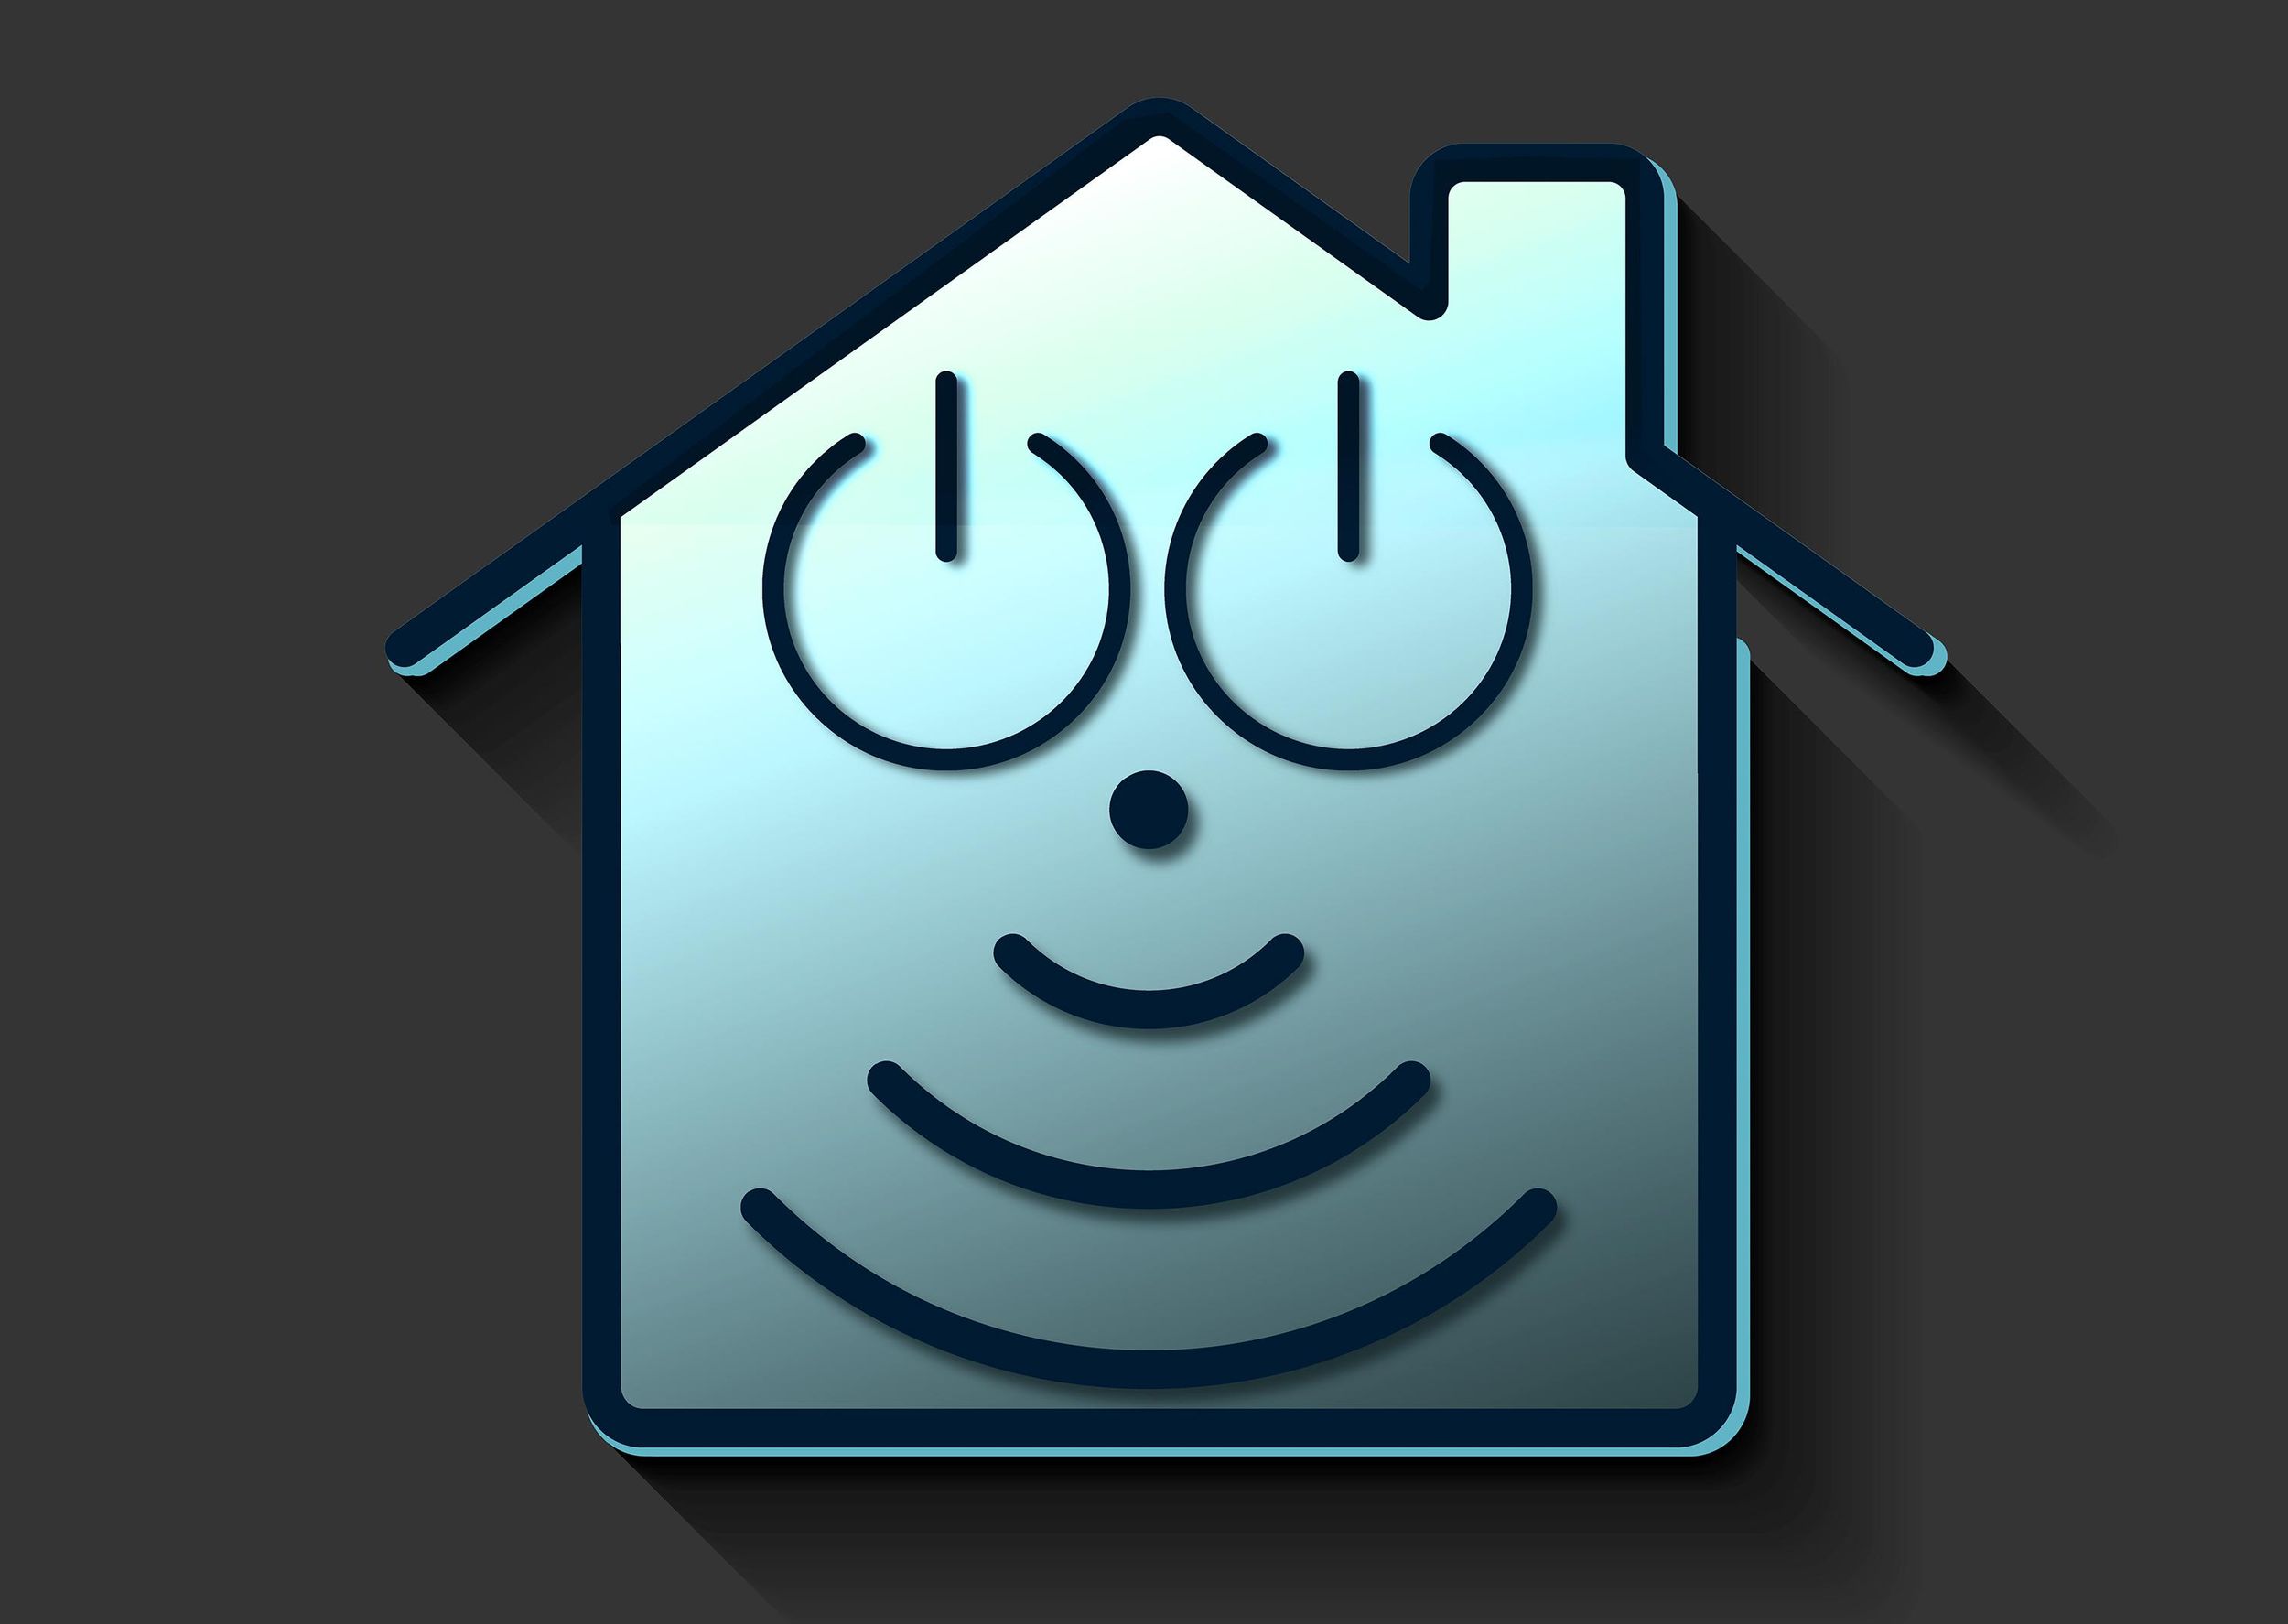 Illustration shows the shape of a house. On/off power symbols and a wifi signal icon form a smiling face